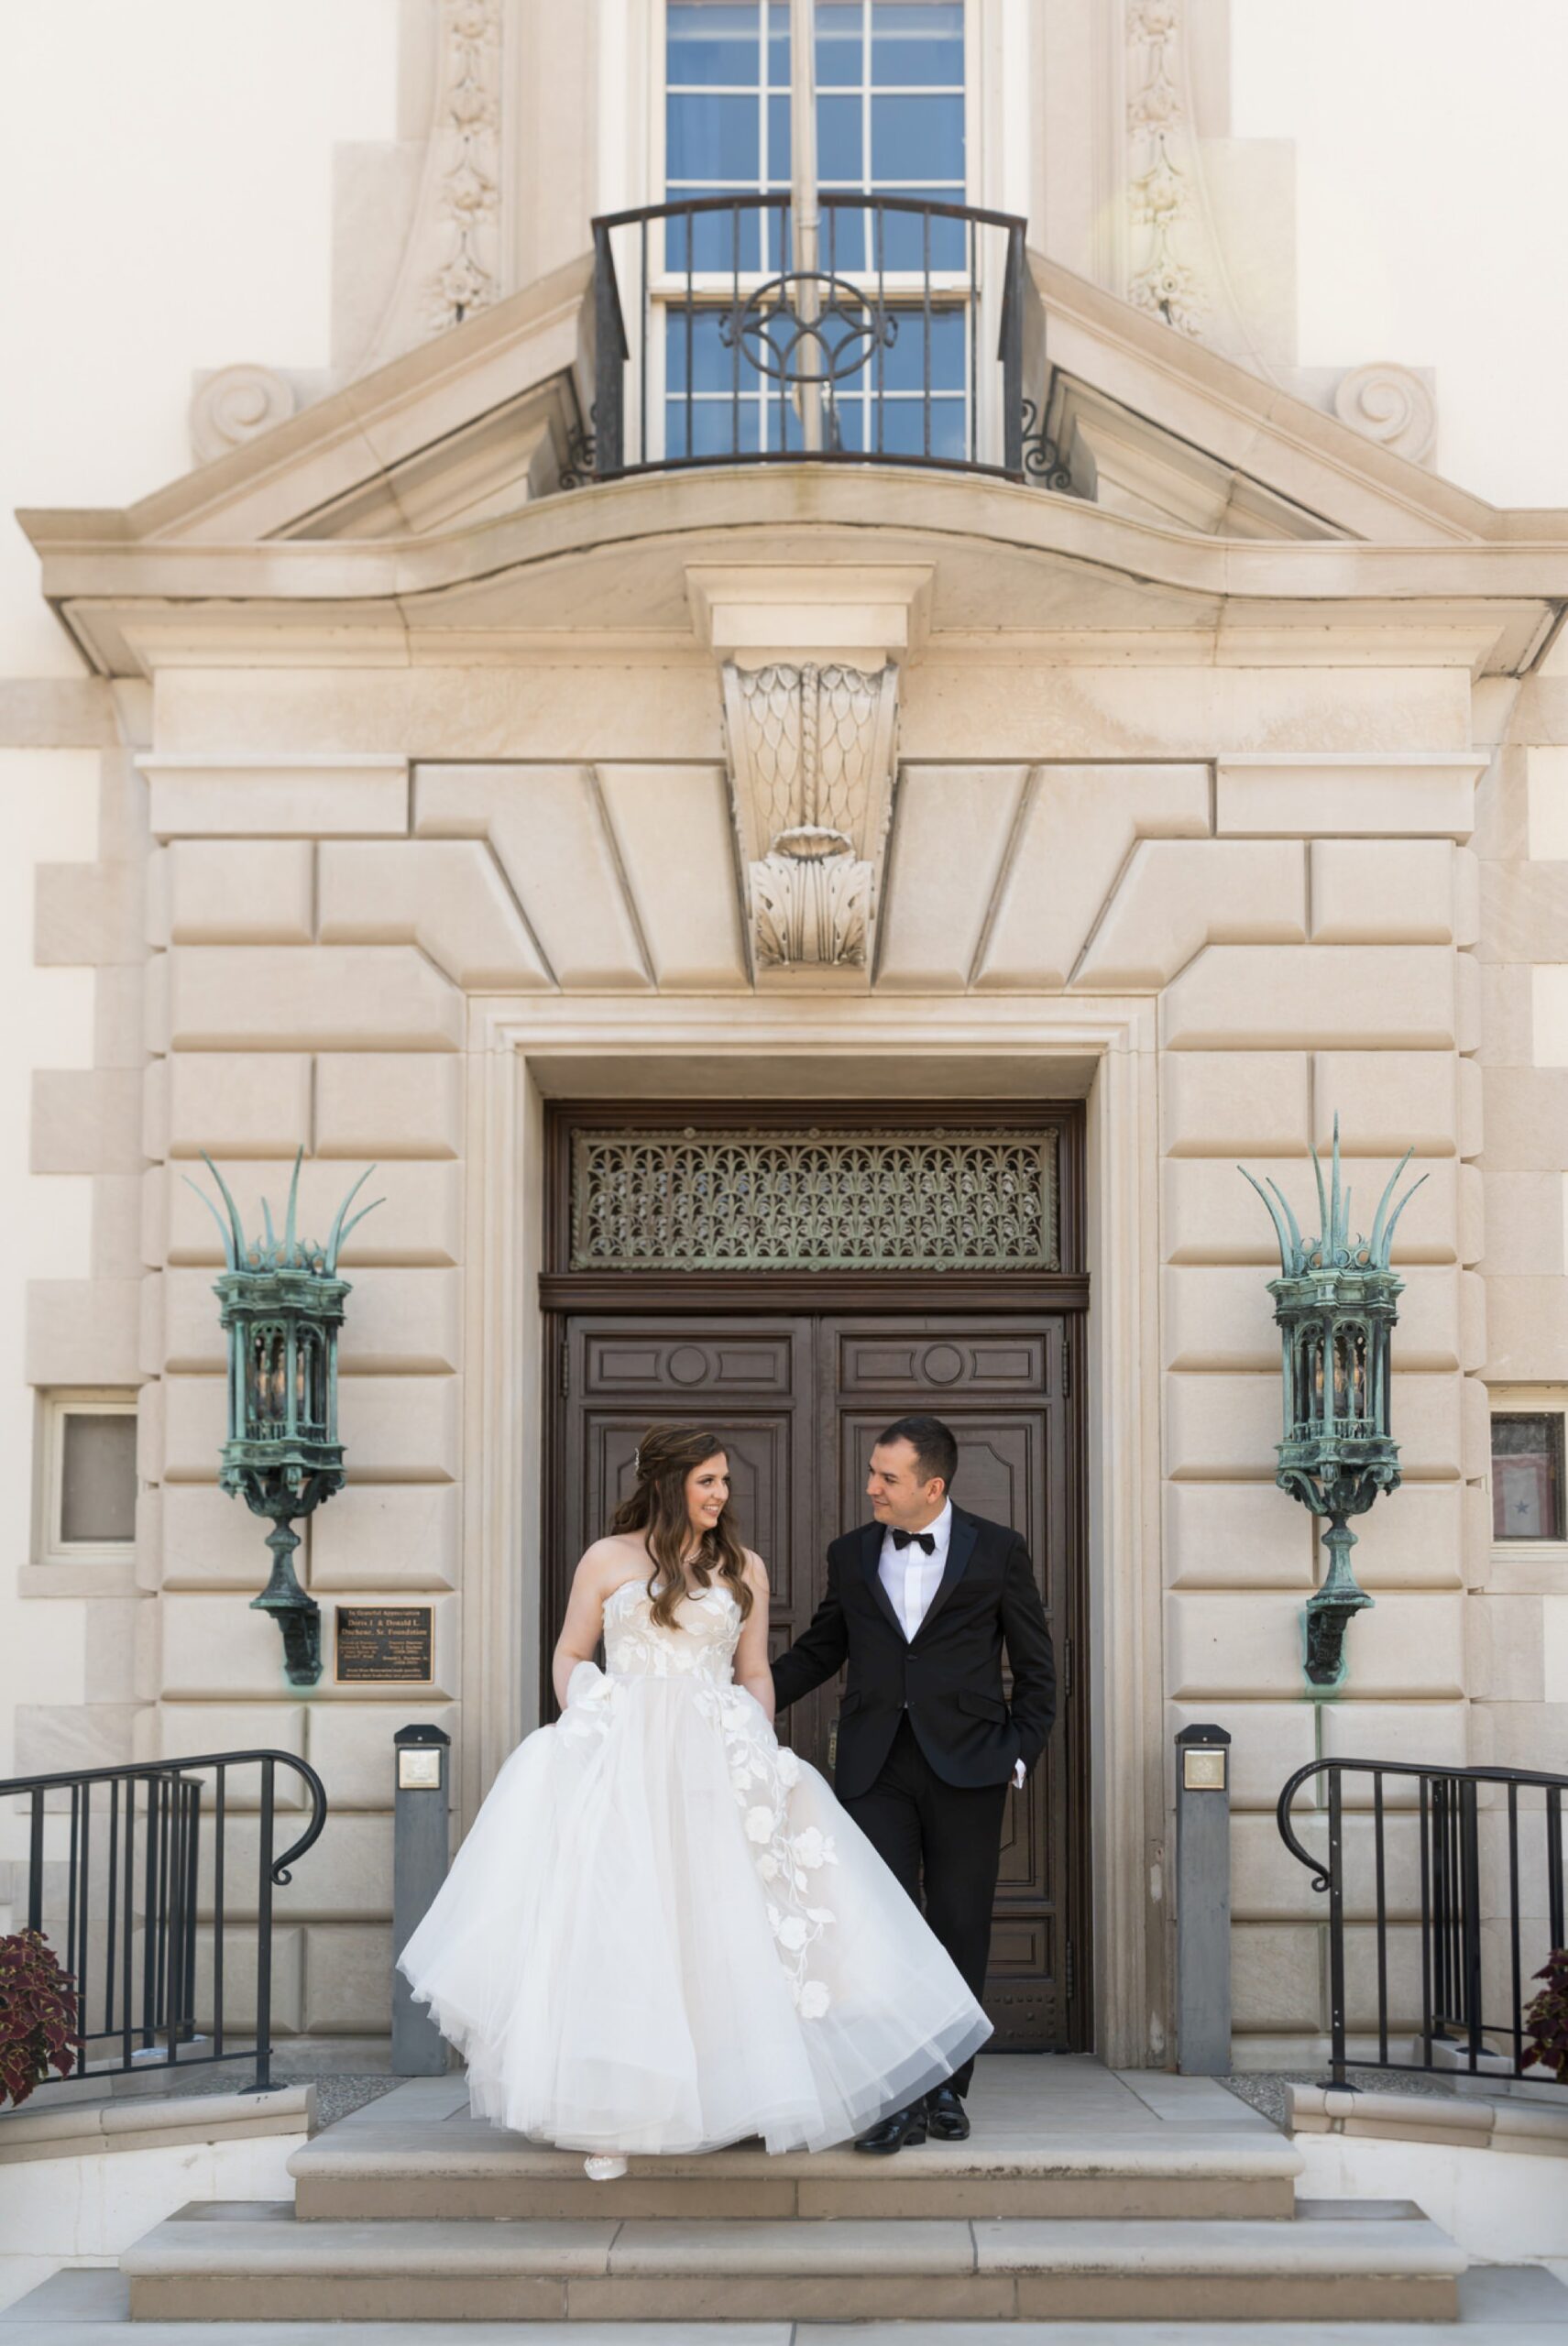 A bride and groom walk down the steps on their wedding day at The War Memorial in Grosse Pointe Farms.